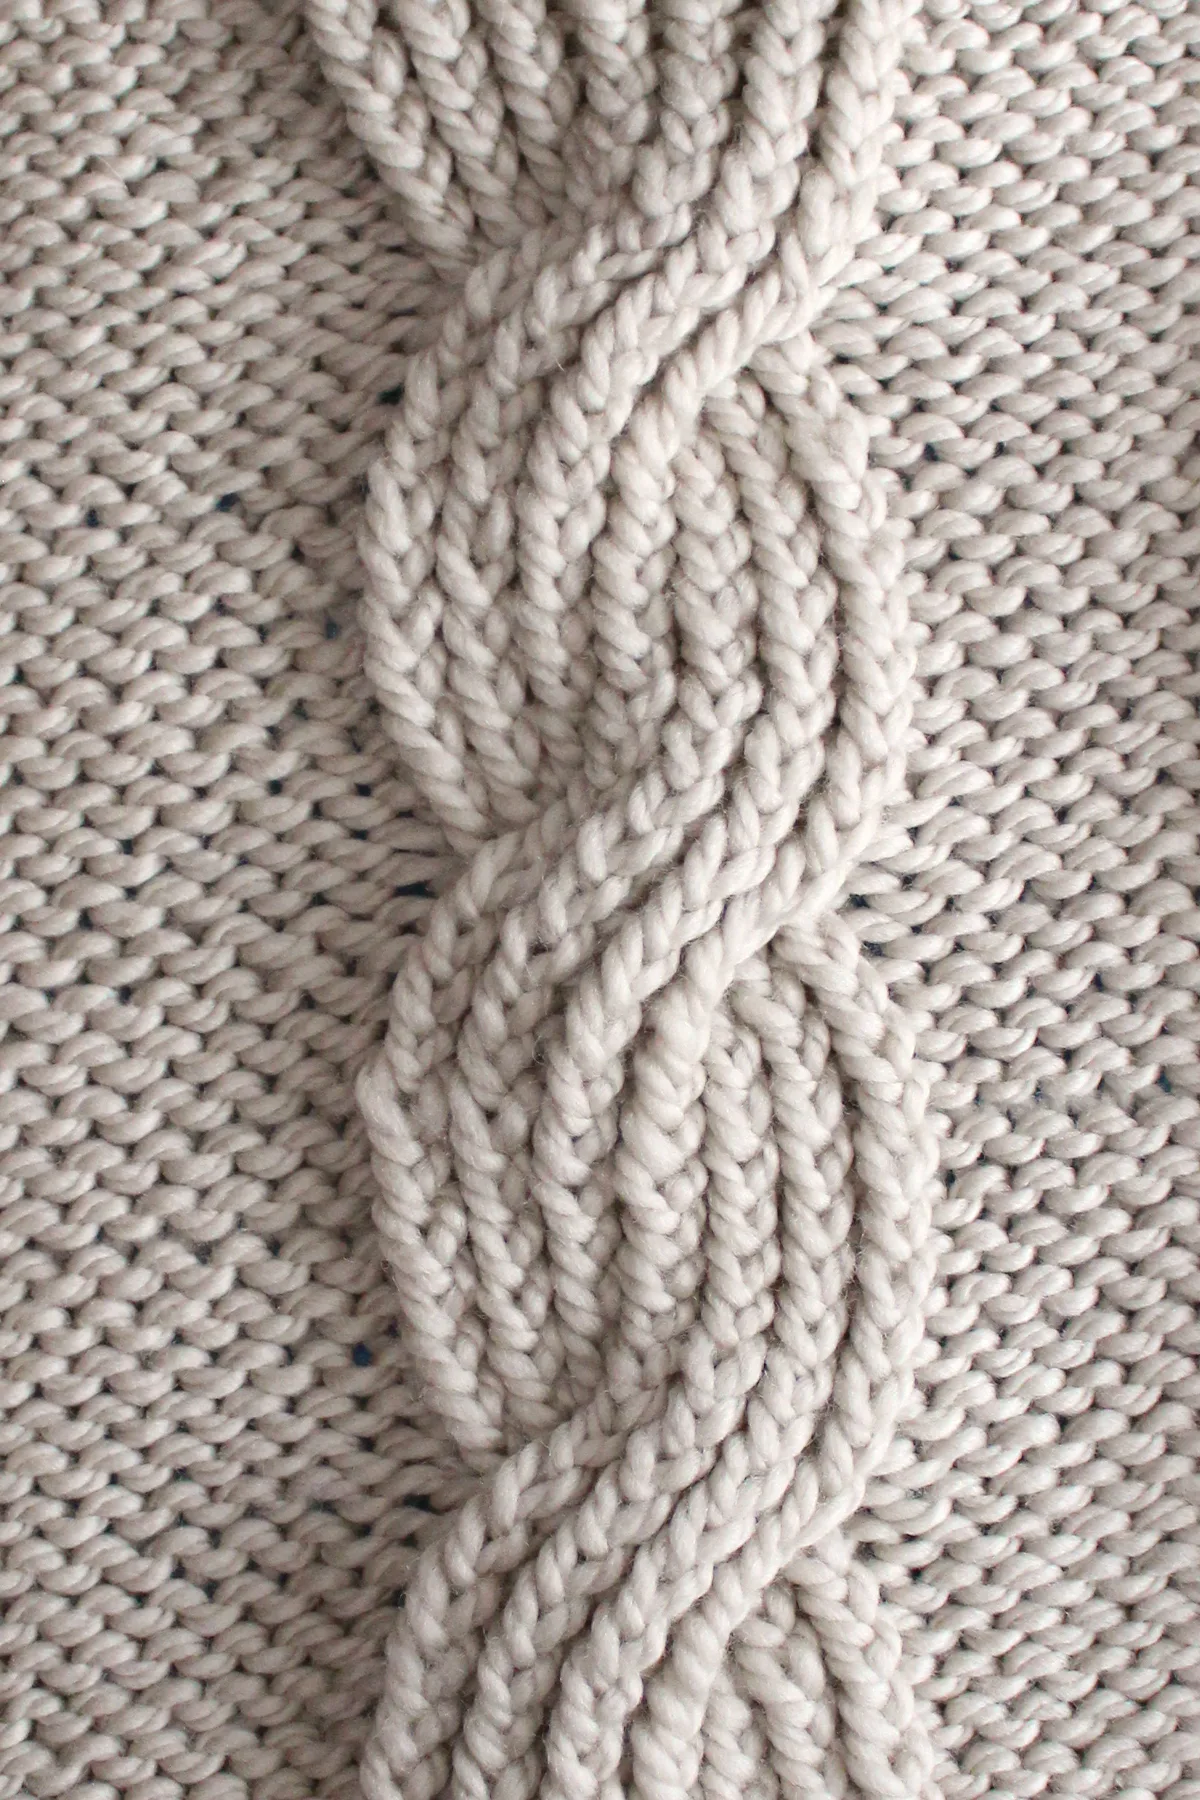 Seven seas cable ribbing knit stitch pattern in beige colored yarn.